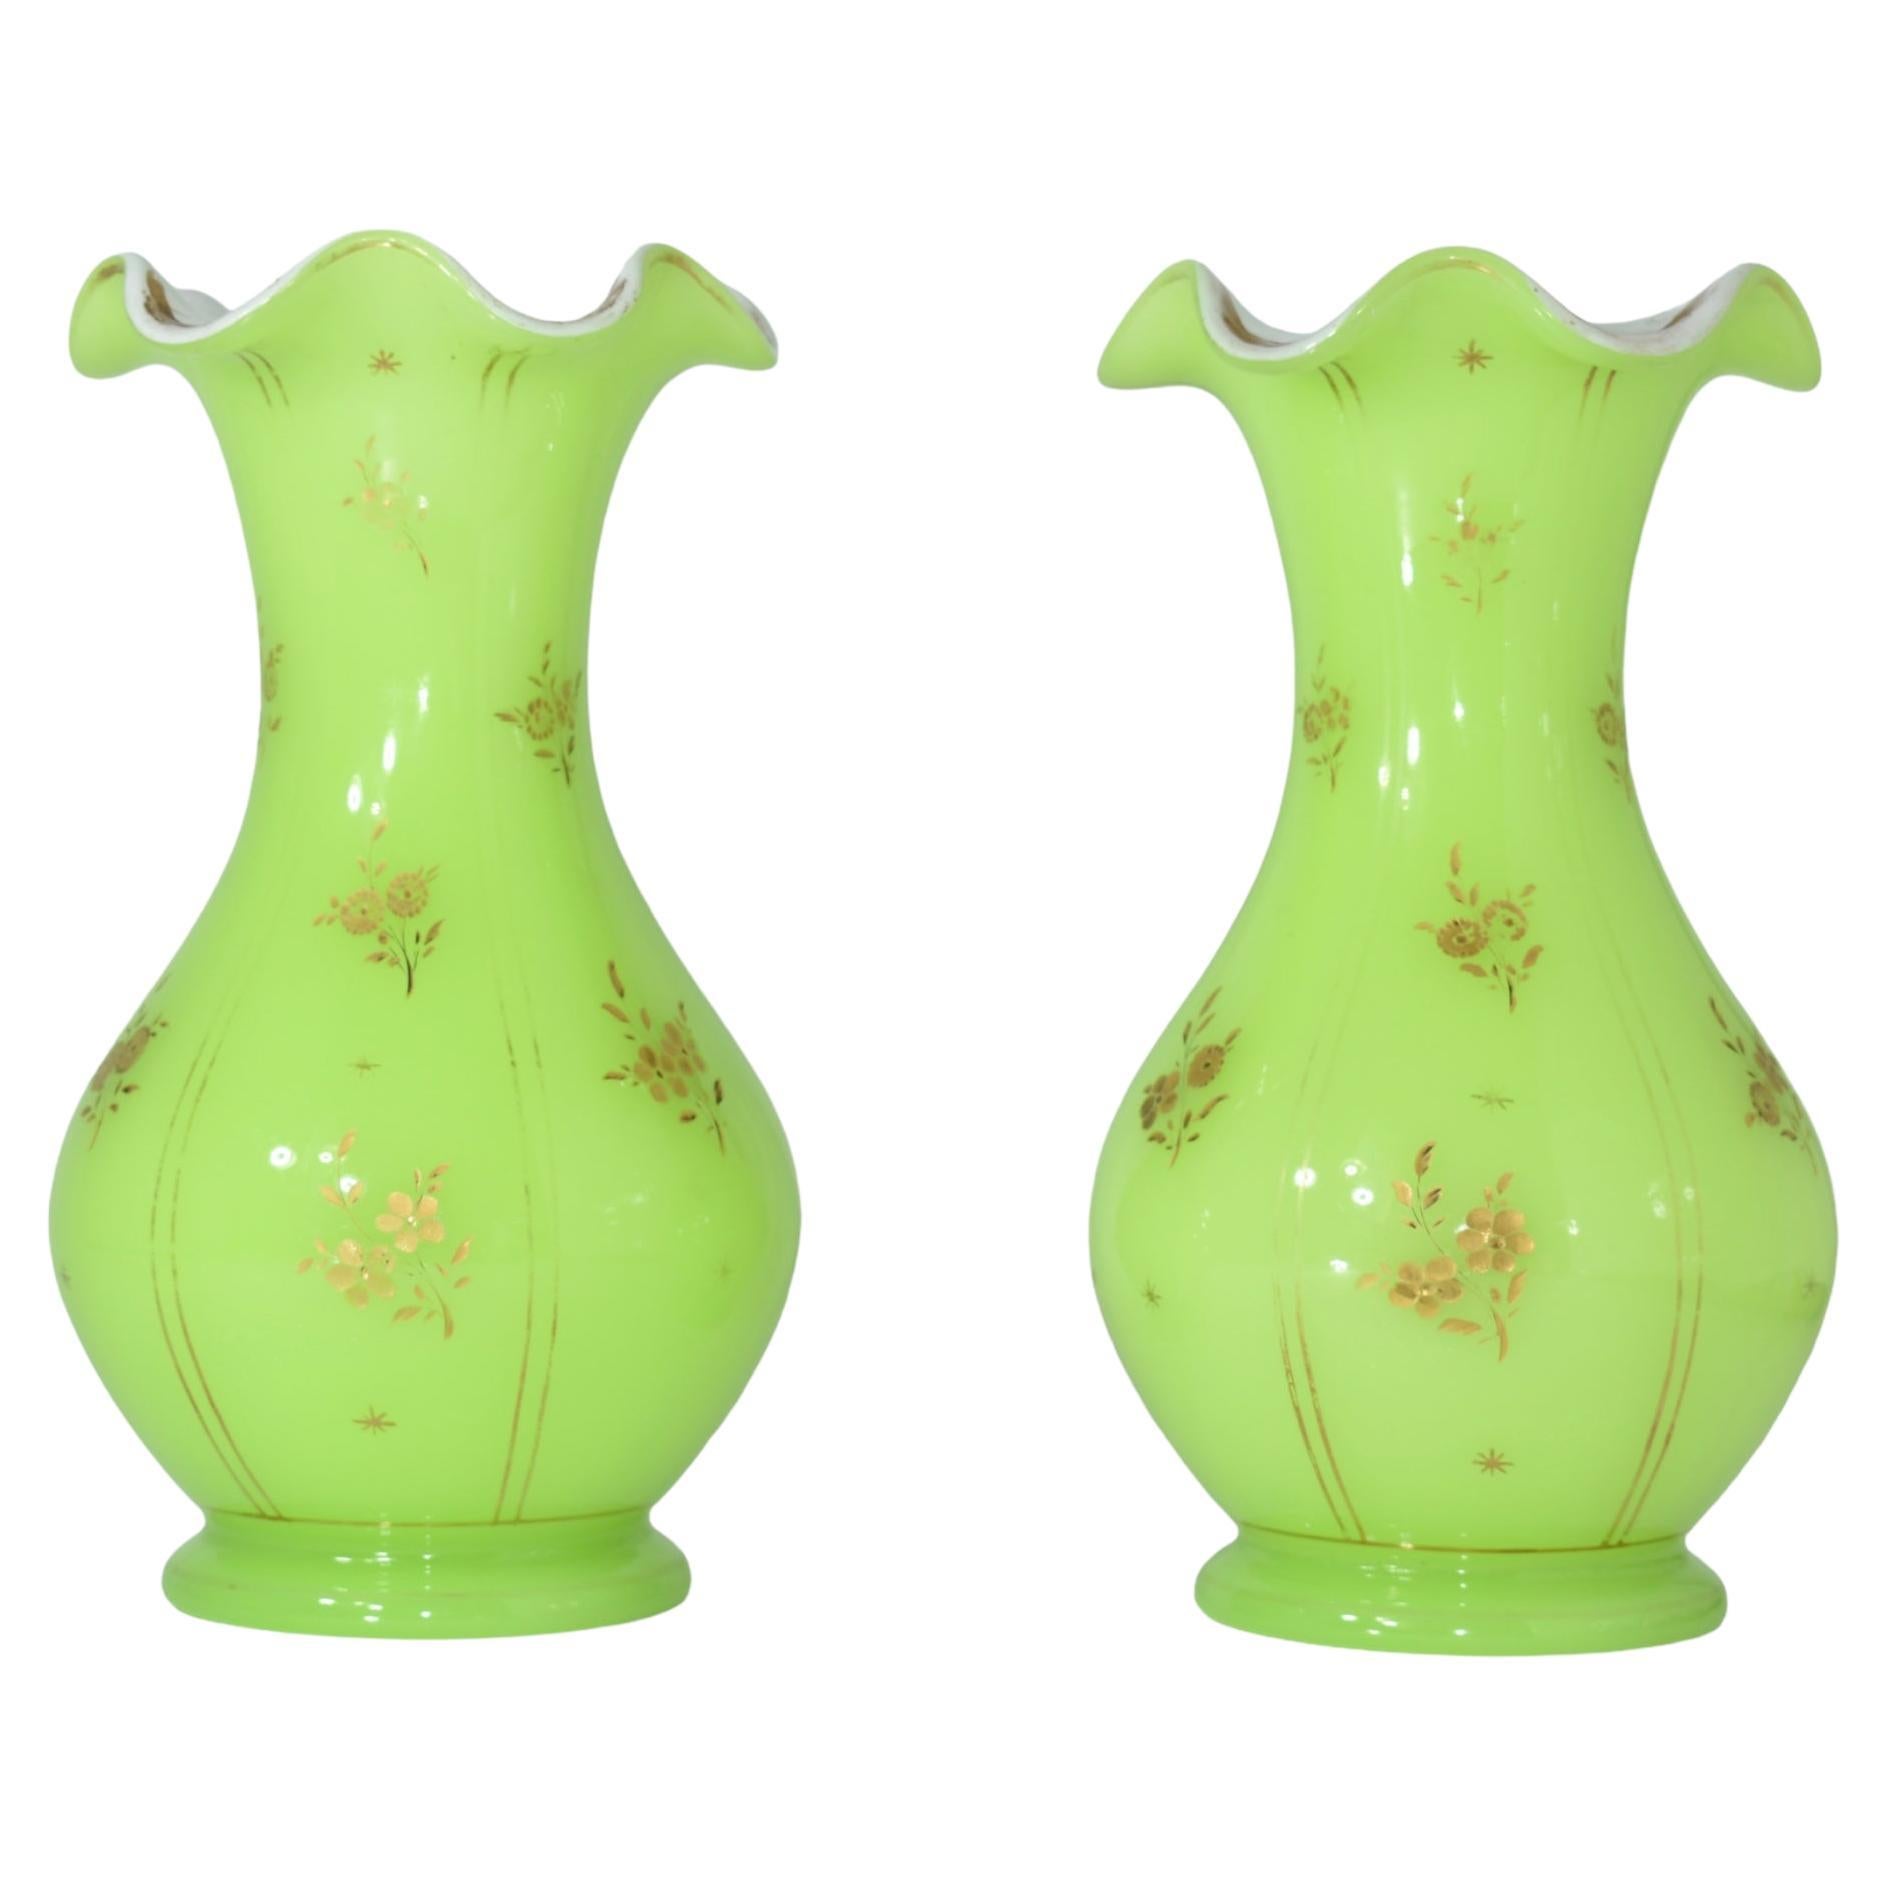 Stunning Pai of Double Opaline Glass Vases Vases

Milky White Opaline Galss with Uranium Green Overlay

Decorated all Around with Gilding Highlights and Flowers

France, 19th century.